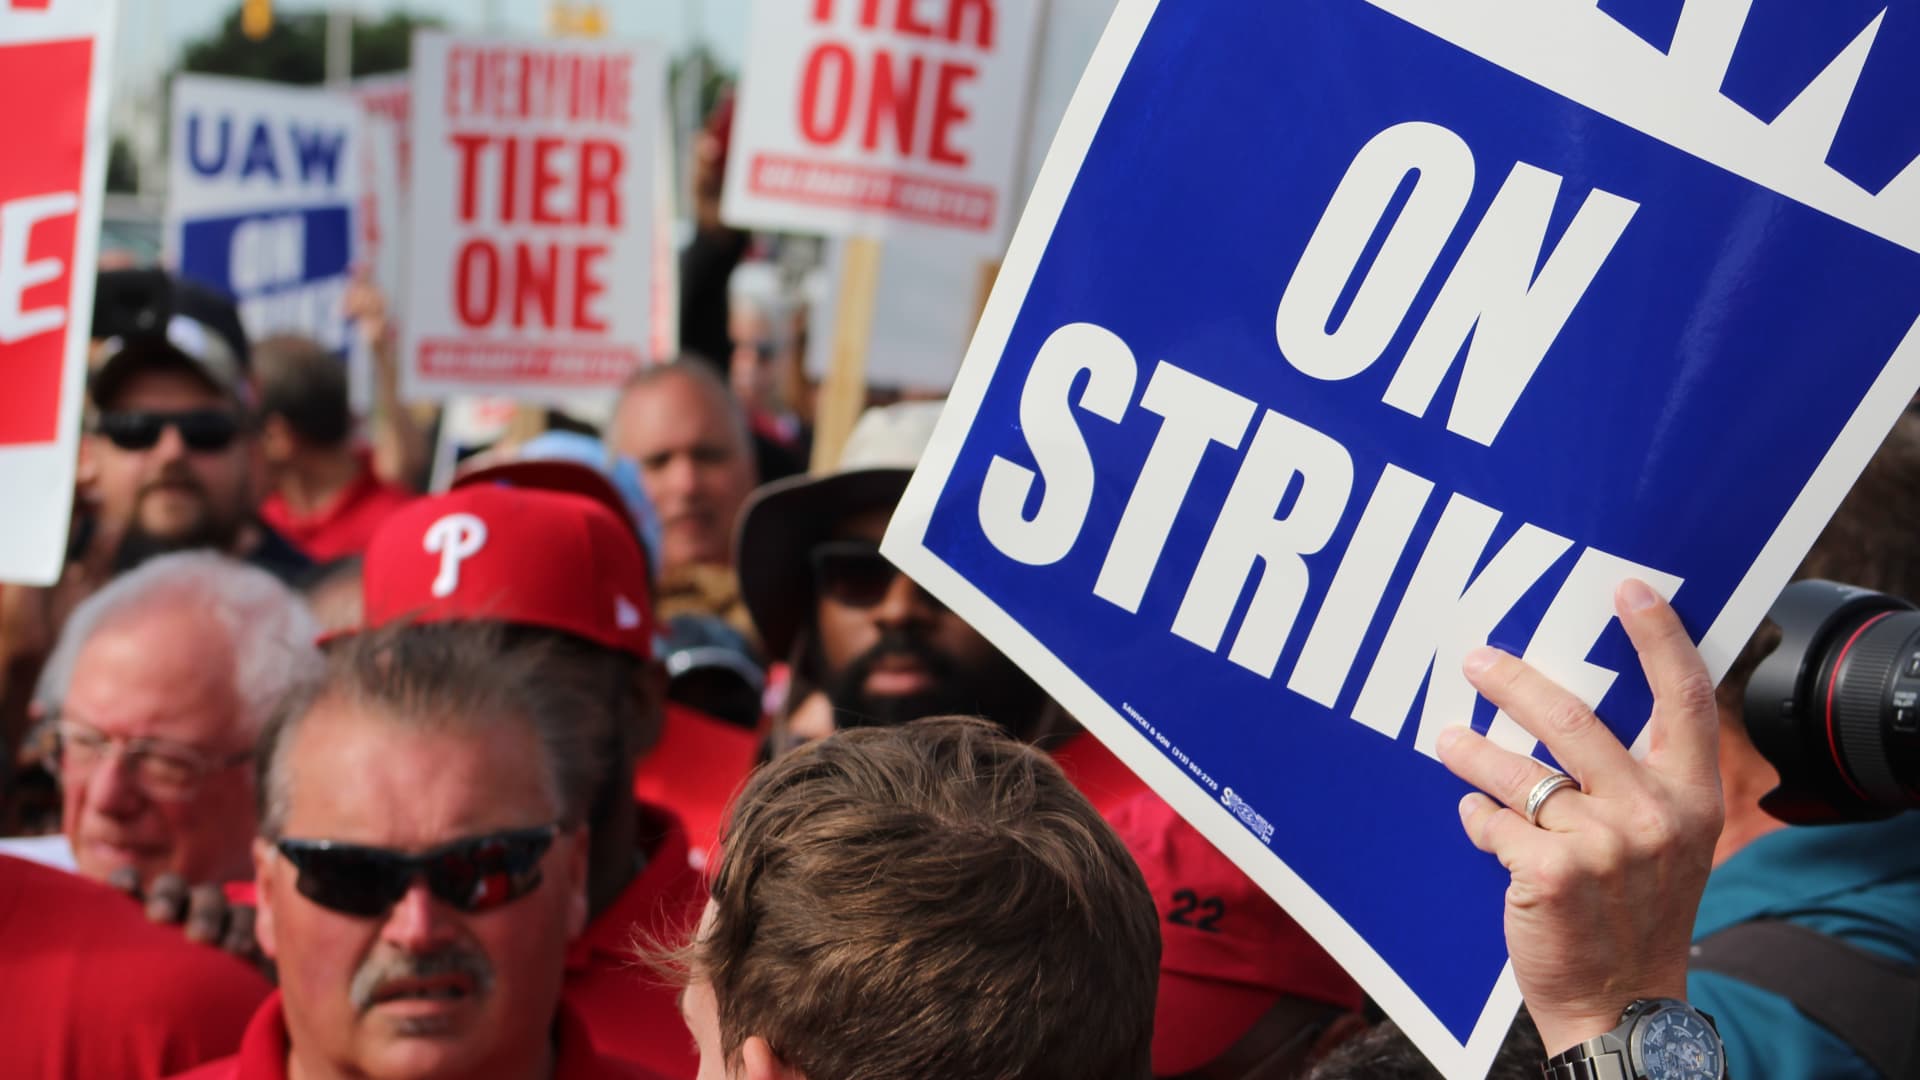 UAW strike cost estimated at $5 billion in 10 days